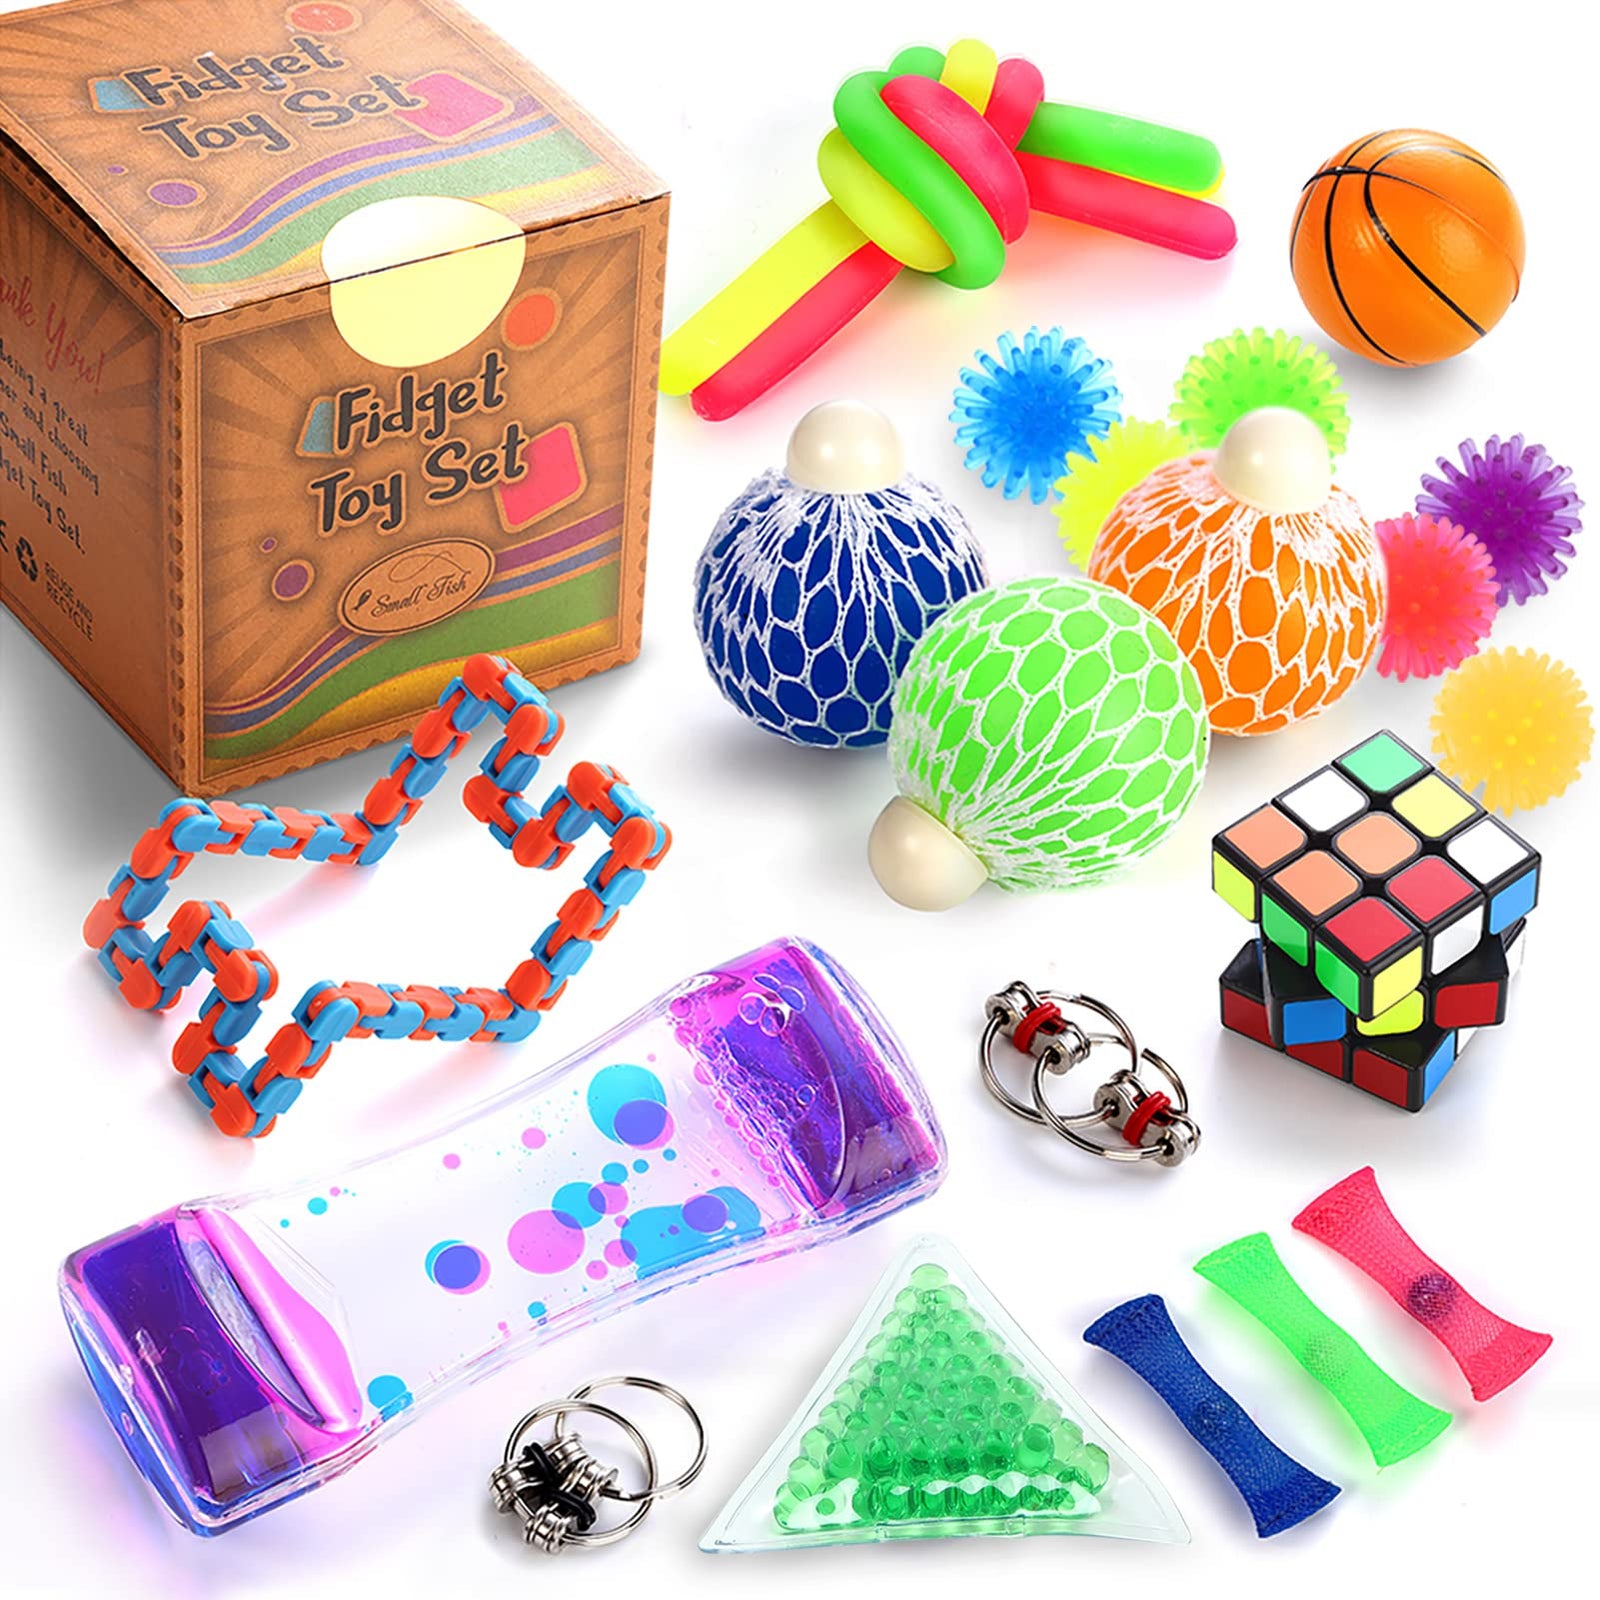 Sensory Toys Set, Fidget Toy Pack for Stress Relief, Anti-Anxiety, Relaxing, and Calming for Kids and Adults, Sensory Fidgets Hand Therapy Pack for Boys and Girls with Autism, ADD, and ADHD